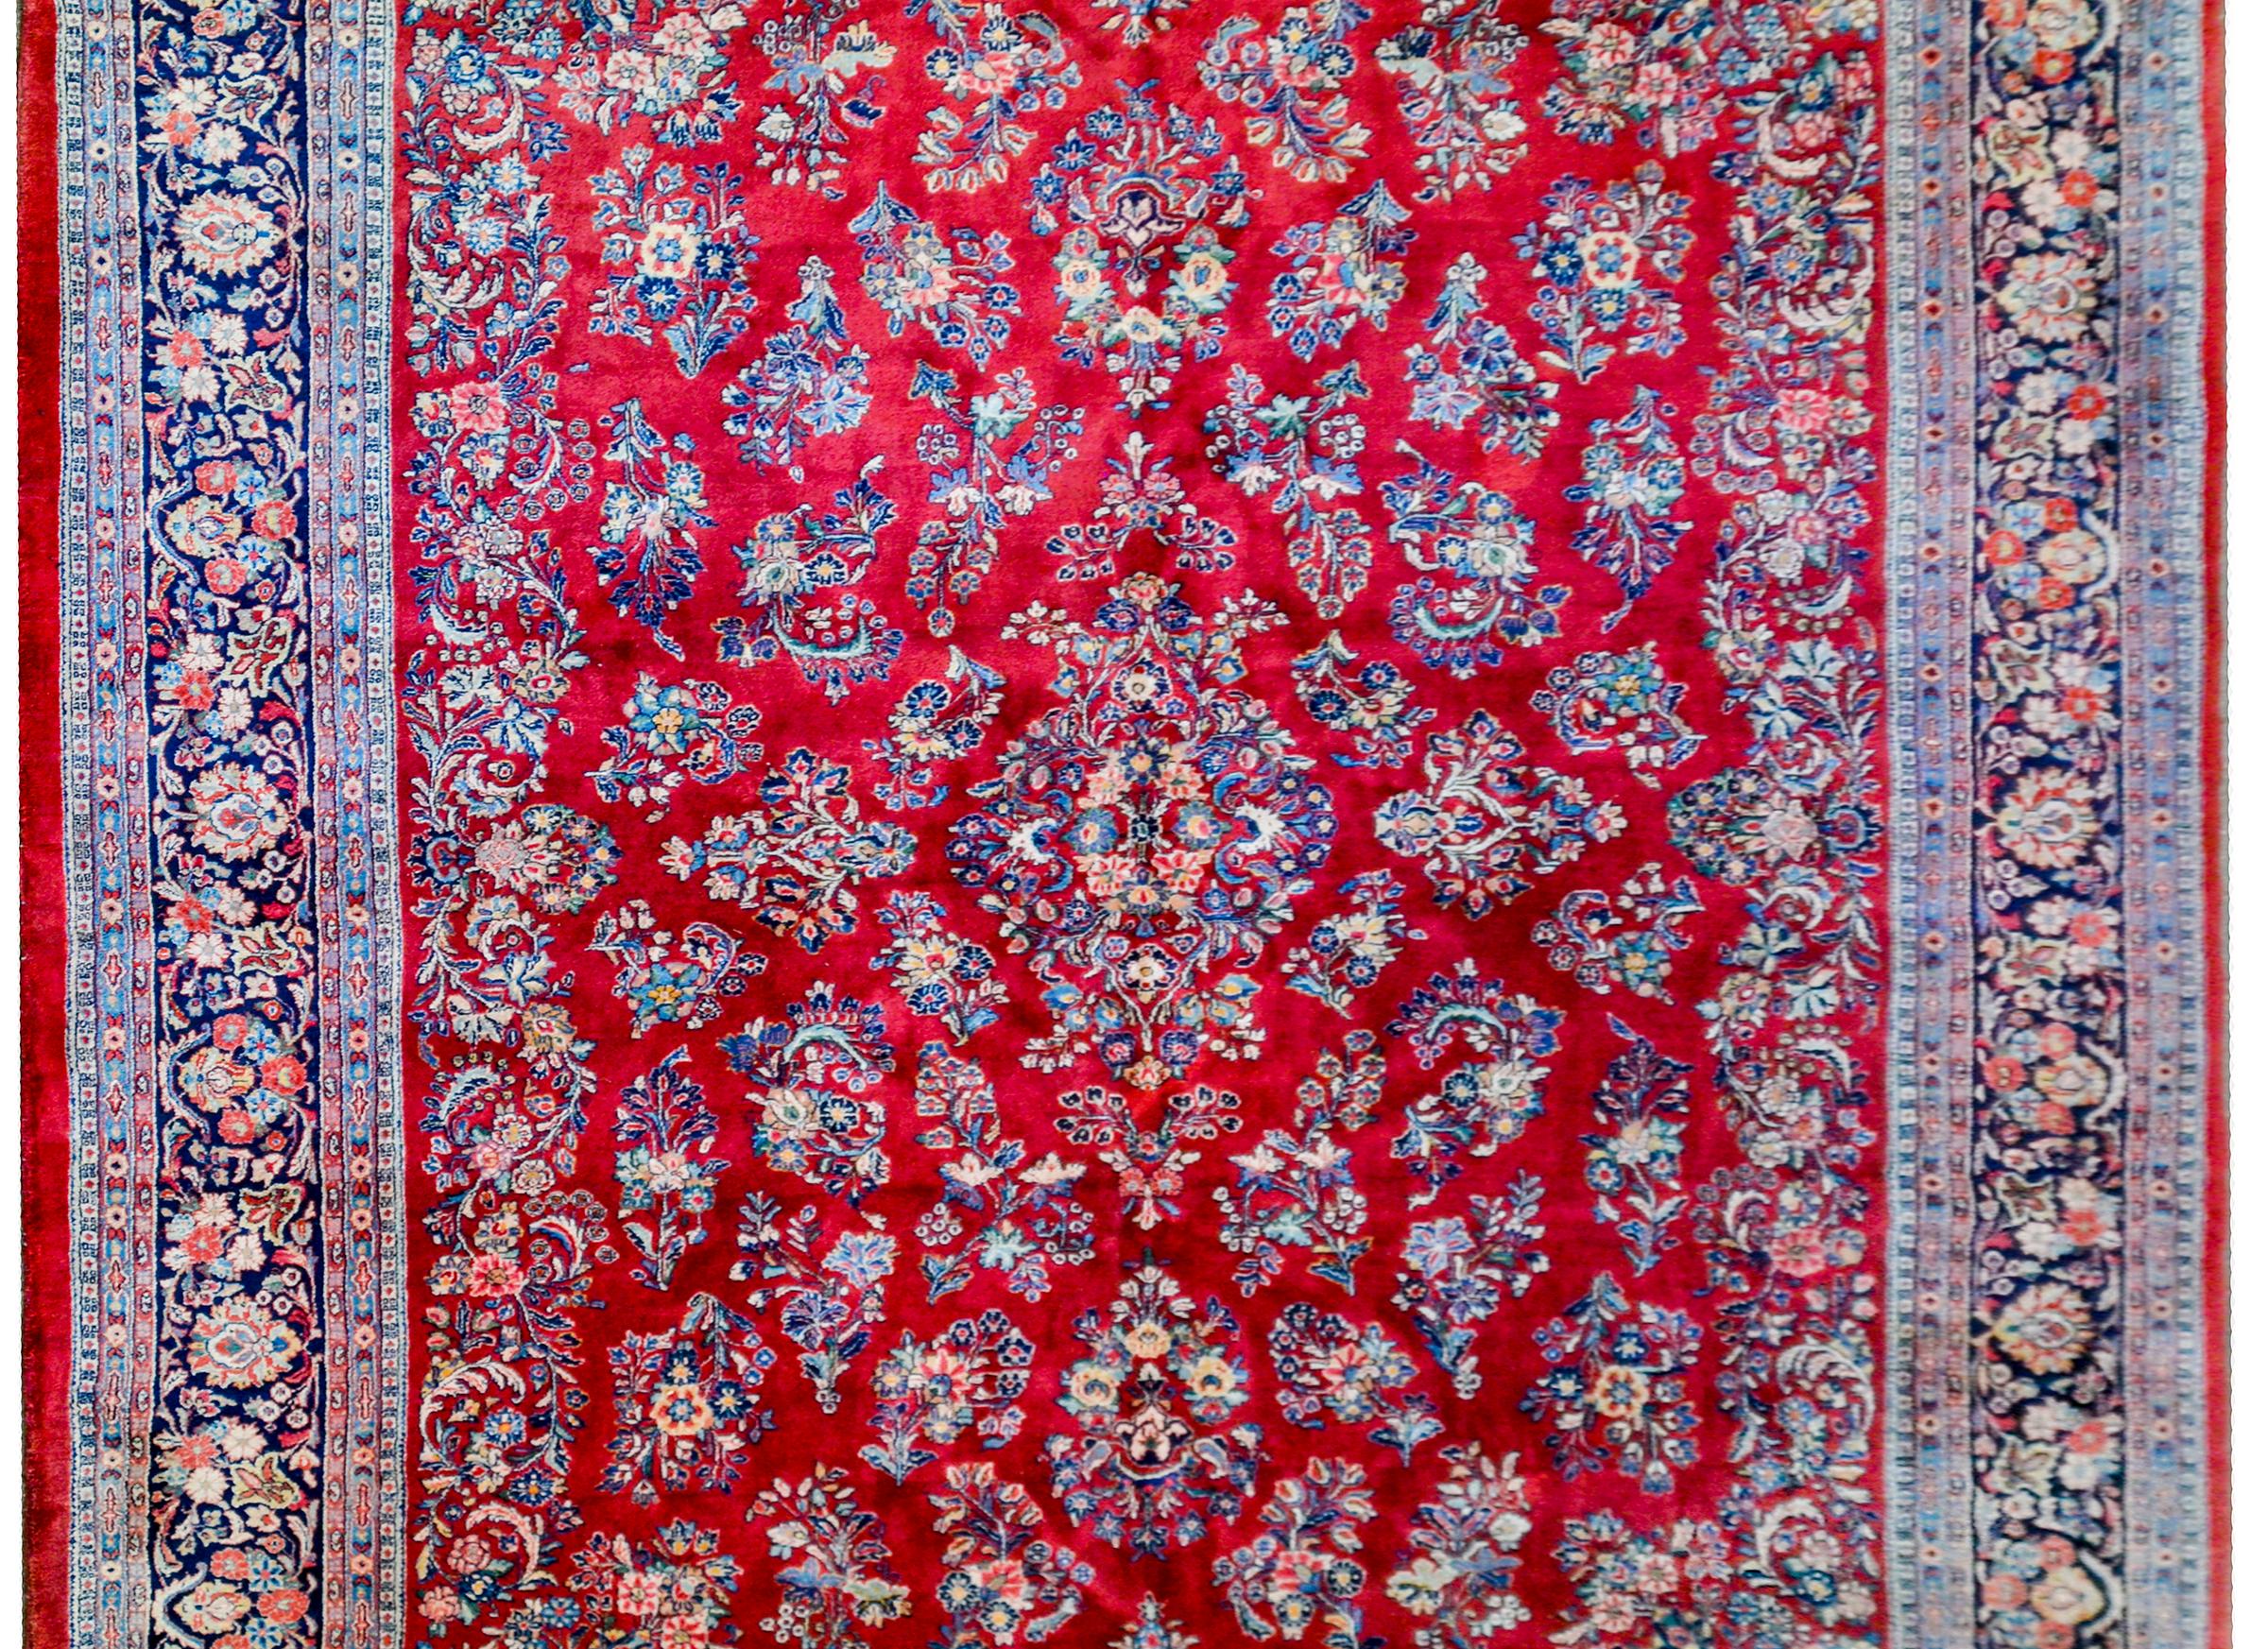 A beautiful early 20th century Persian Sarouk rug with an amazing mirrored myriad floral and leaf pattern woven in light and dark indigo, gold, and pink colored wool on a deep crimson background. The border is complex with a wide, densely woven,